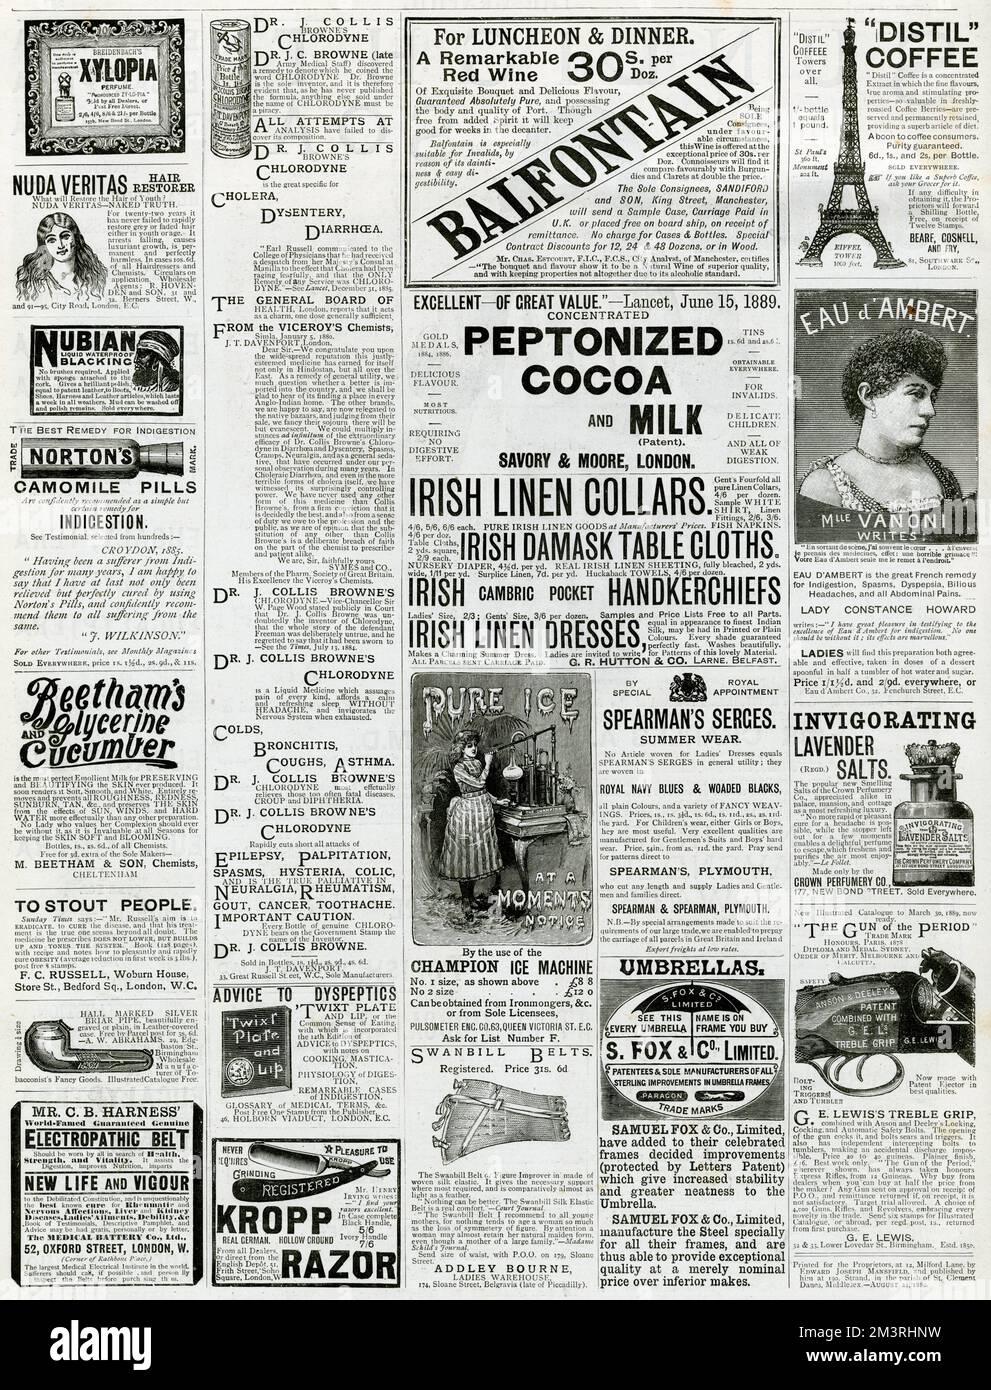 A variety of advertisements in 'The Graphic' dated August 1889, showing 'Nuda Veritas' hair restorer, 'Nubian', black polish for boots and shoes, 'Norton's Camomile Pills', for indigestion, 'Beetham's Glycerin and Cucumber', emollient milk for preserving and beautifying the skin, to cure obesity, 'Mr. C B Harness electropathic belt', for health, strength and vitality, 'Dr. J Collis Brownes' Chlorodyne', medicine for cholera, dysentery and diarrhea, advice for dyspeptics, 'Kropp Razor', 'Peptonized Cocoa and Milk', 'Pure Irish linen goods', 'Champion Ice Machine', 'Swa Stock Photo